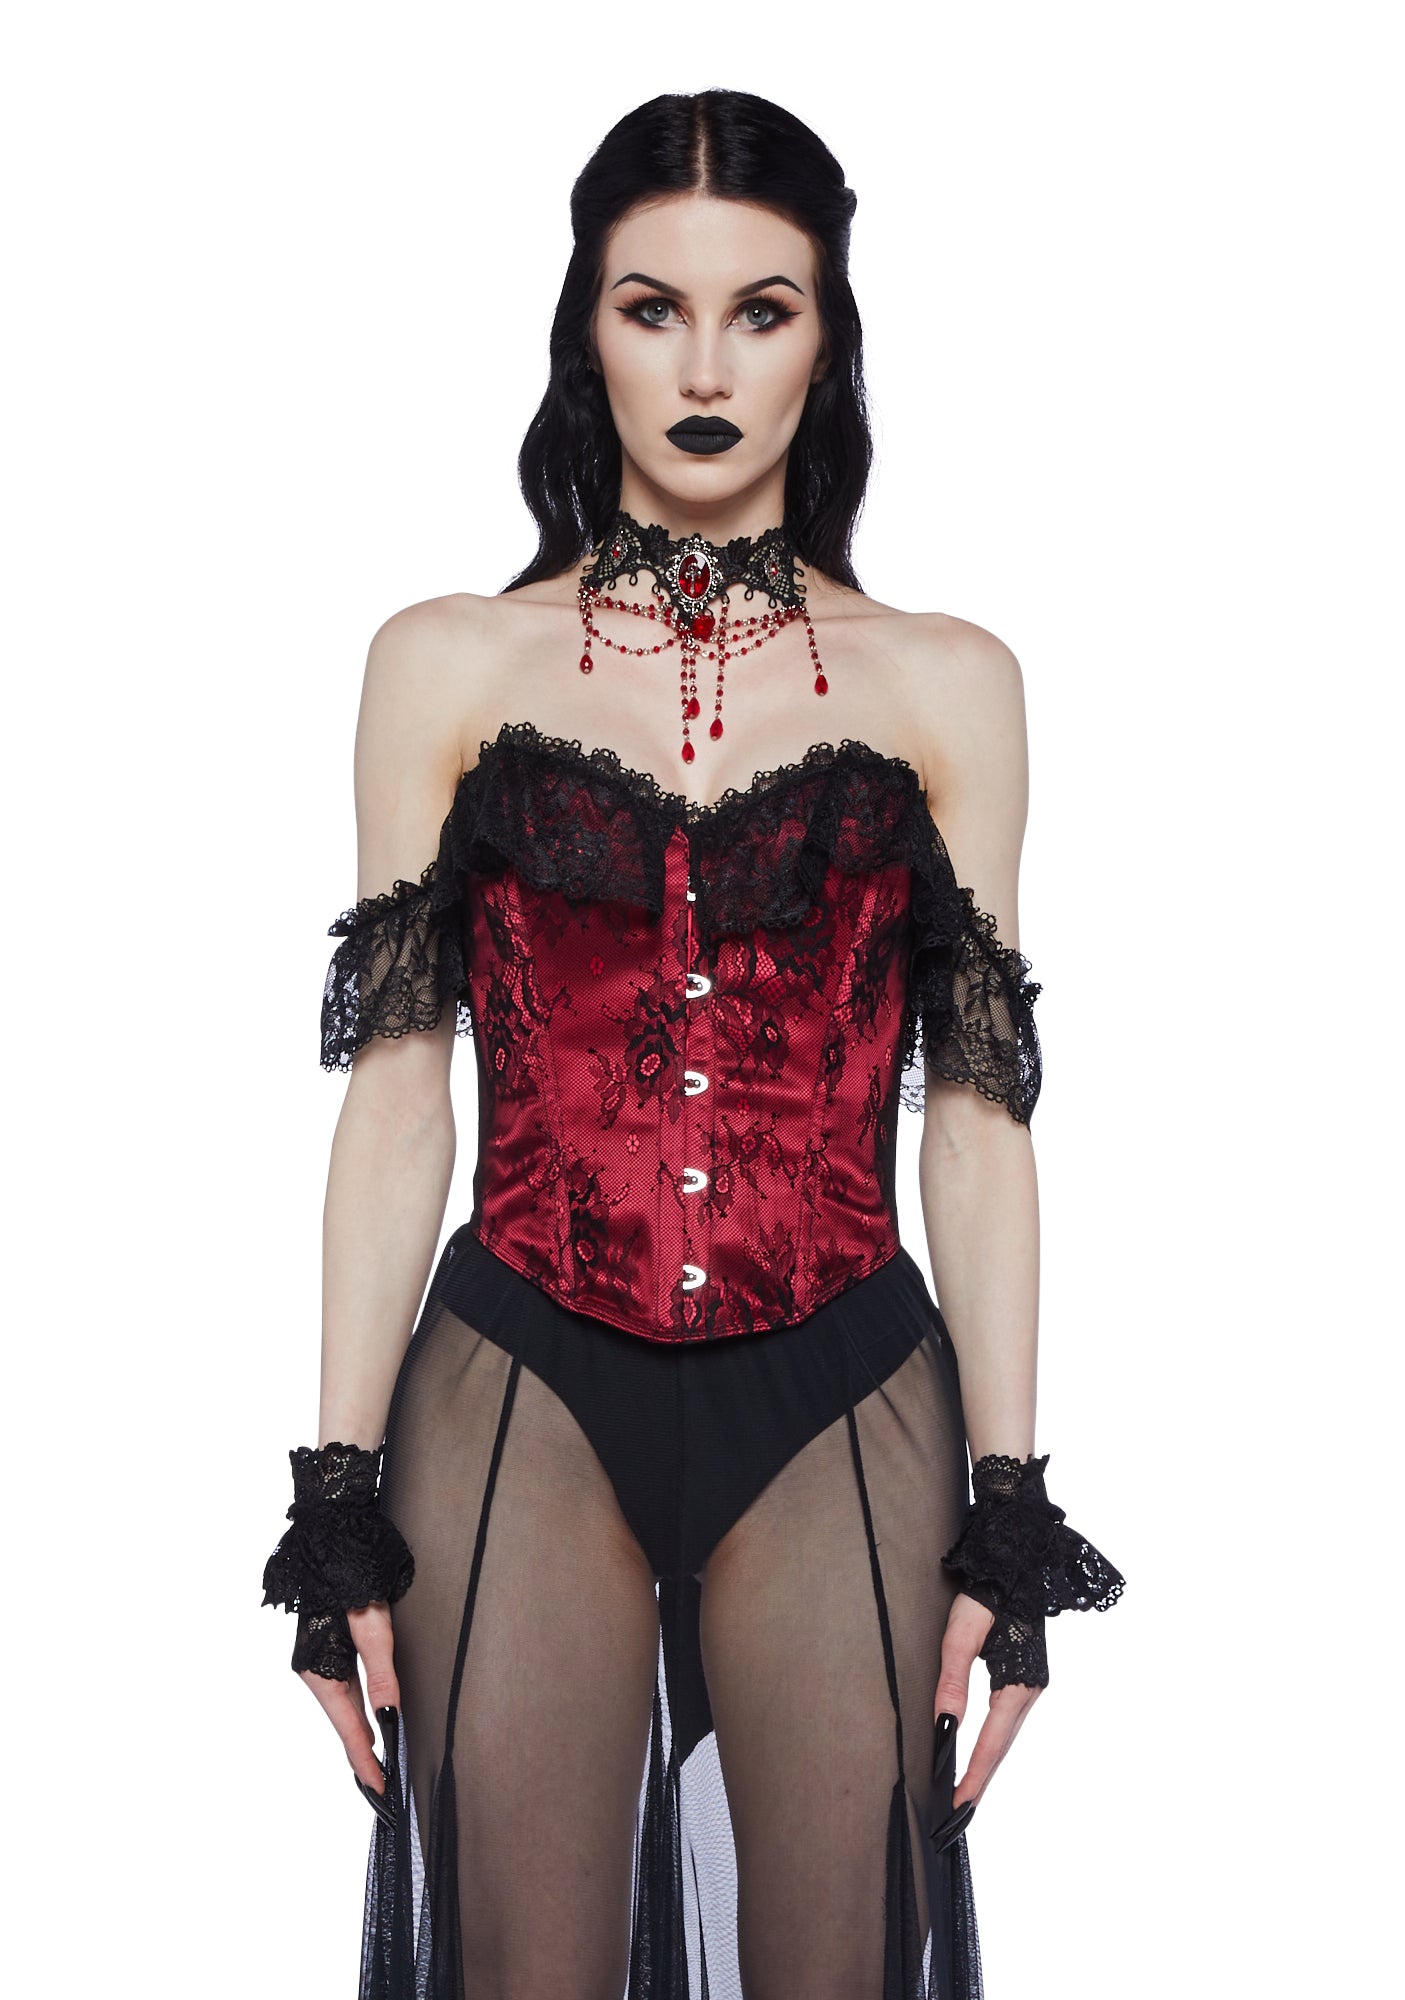 Waist cincher with lacing, stretch lace, garters